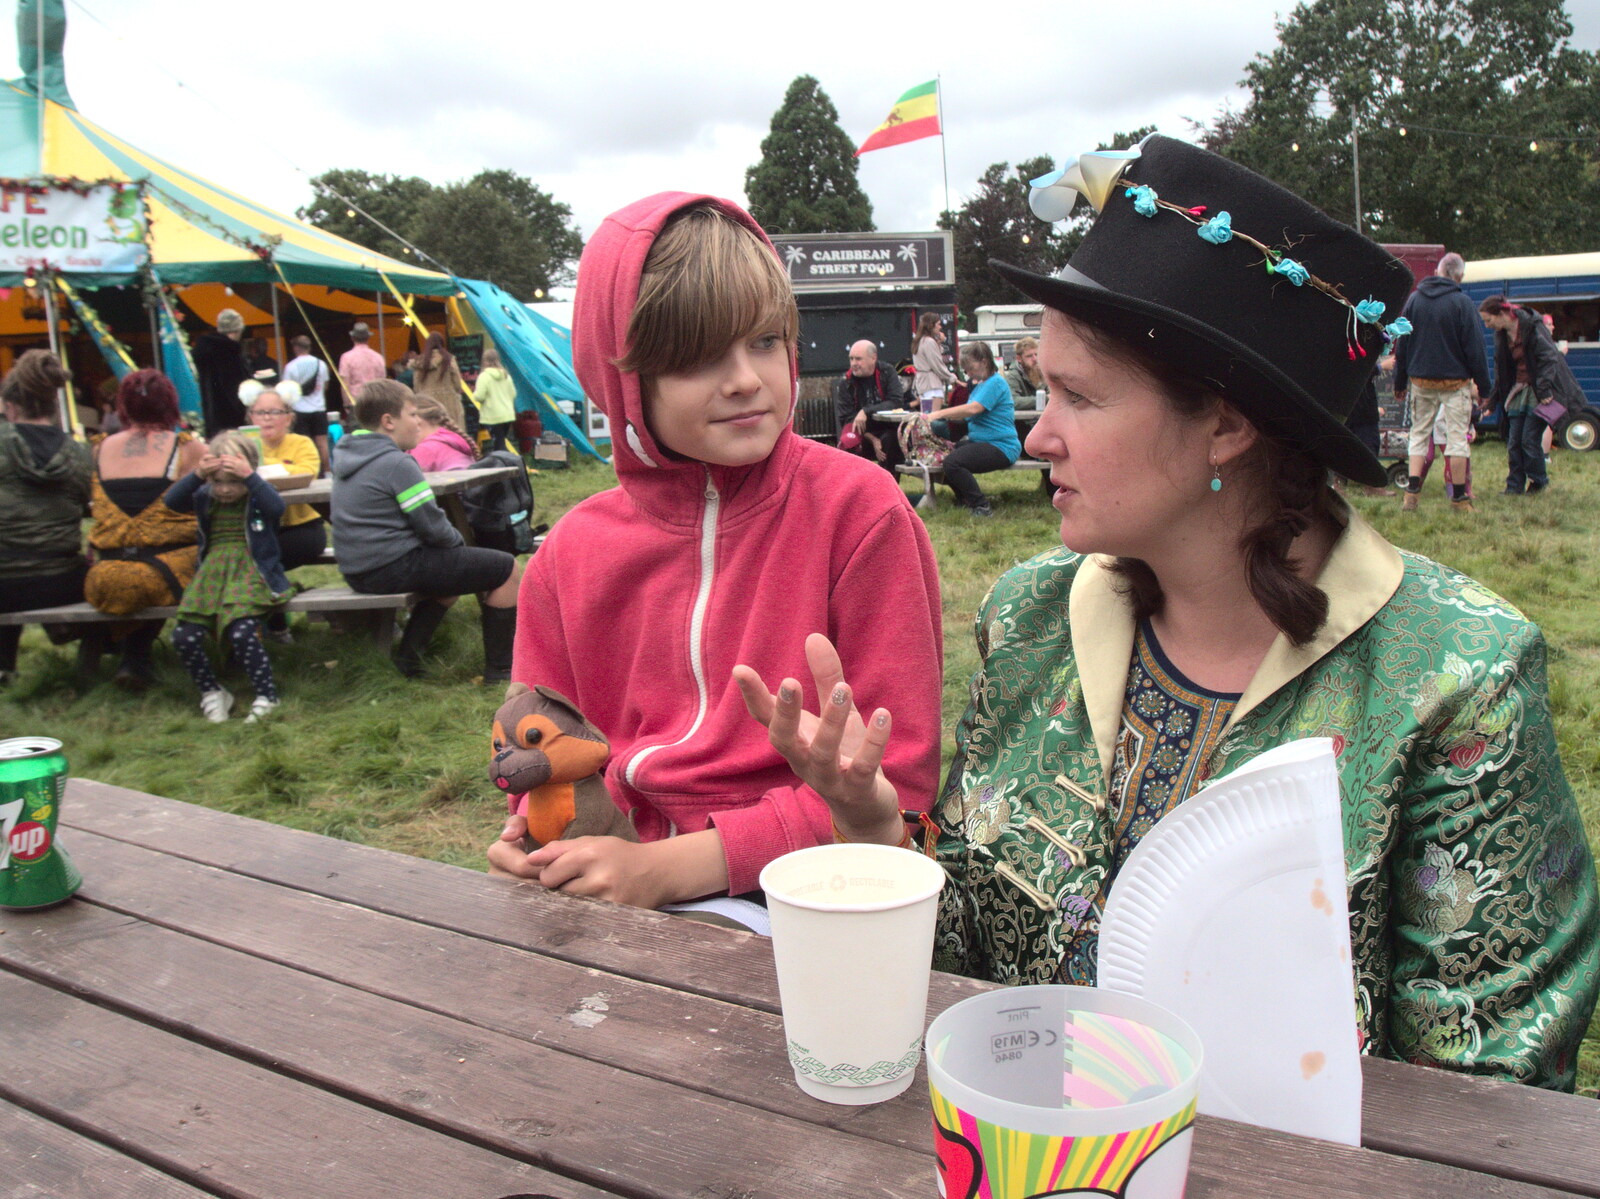 Harry and Isobel from Maui Waui Festival, Hill Farm, Gressenhall, Norfolk - 28th August 2021